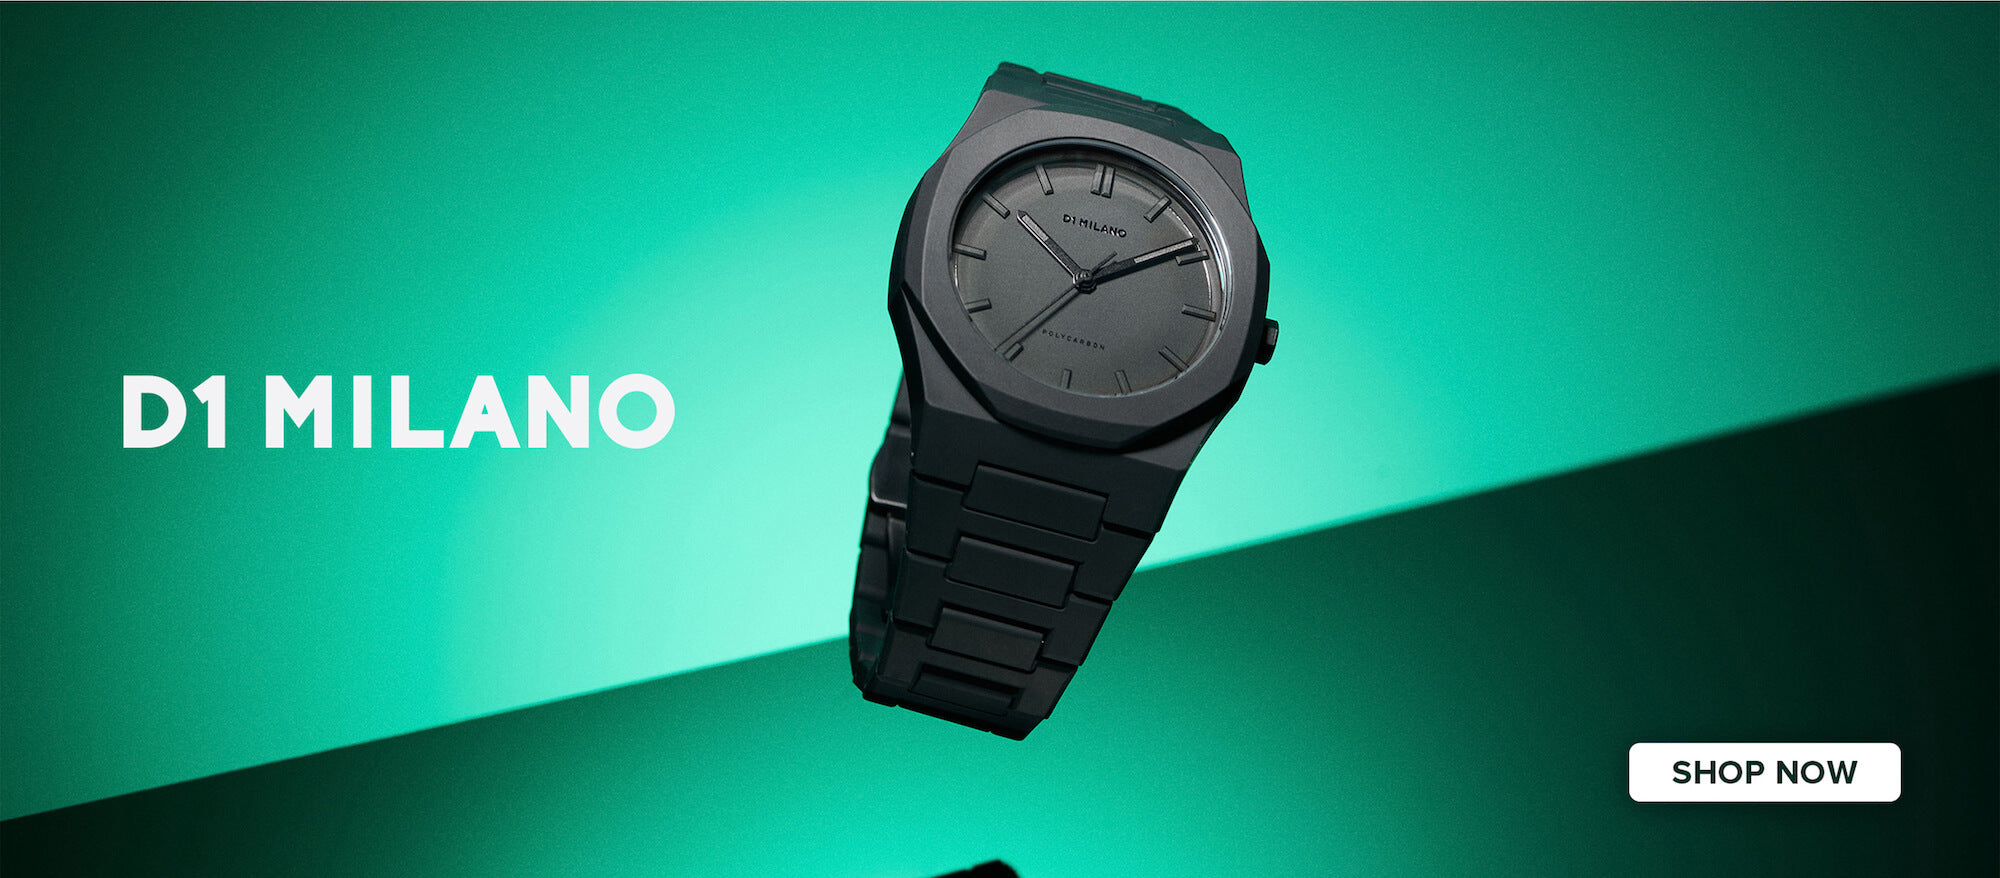 Purchase D1 Milano Watches in Meridian Watch Store now – Meridian  Philippines